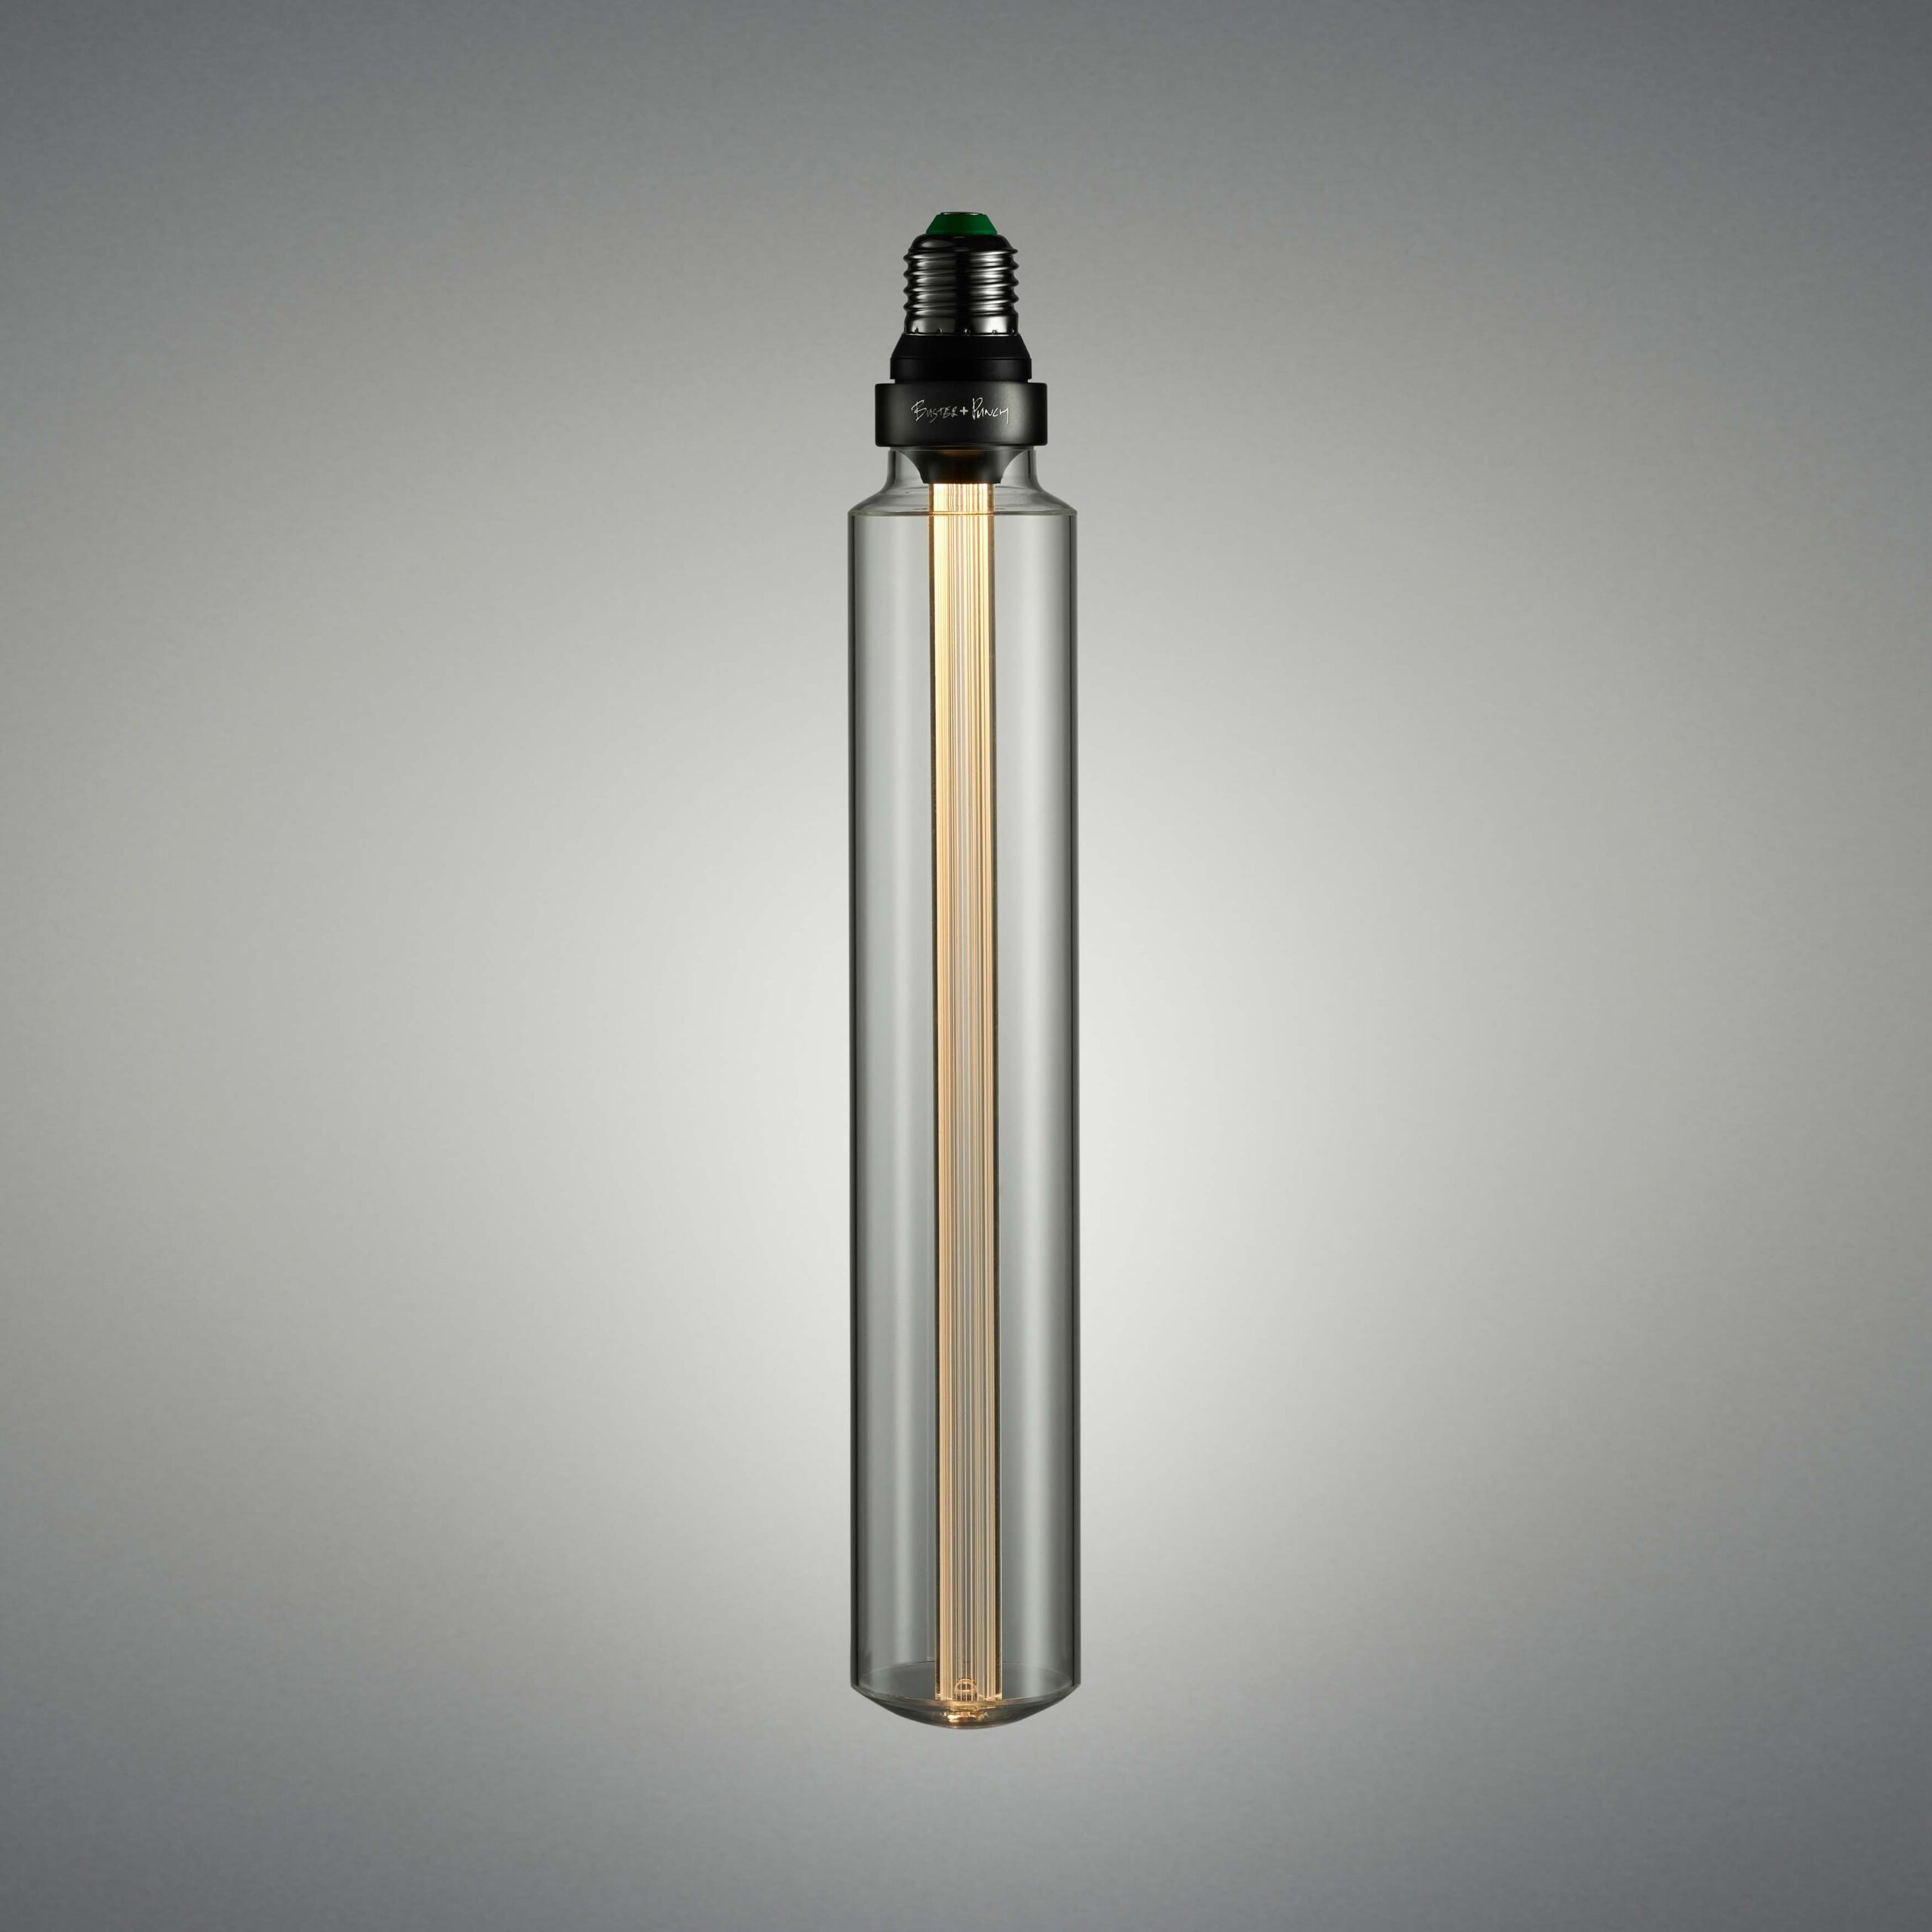 BUSTER BULB / TUBE / NON-DIMMABLE